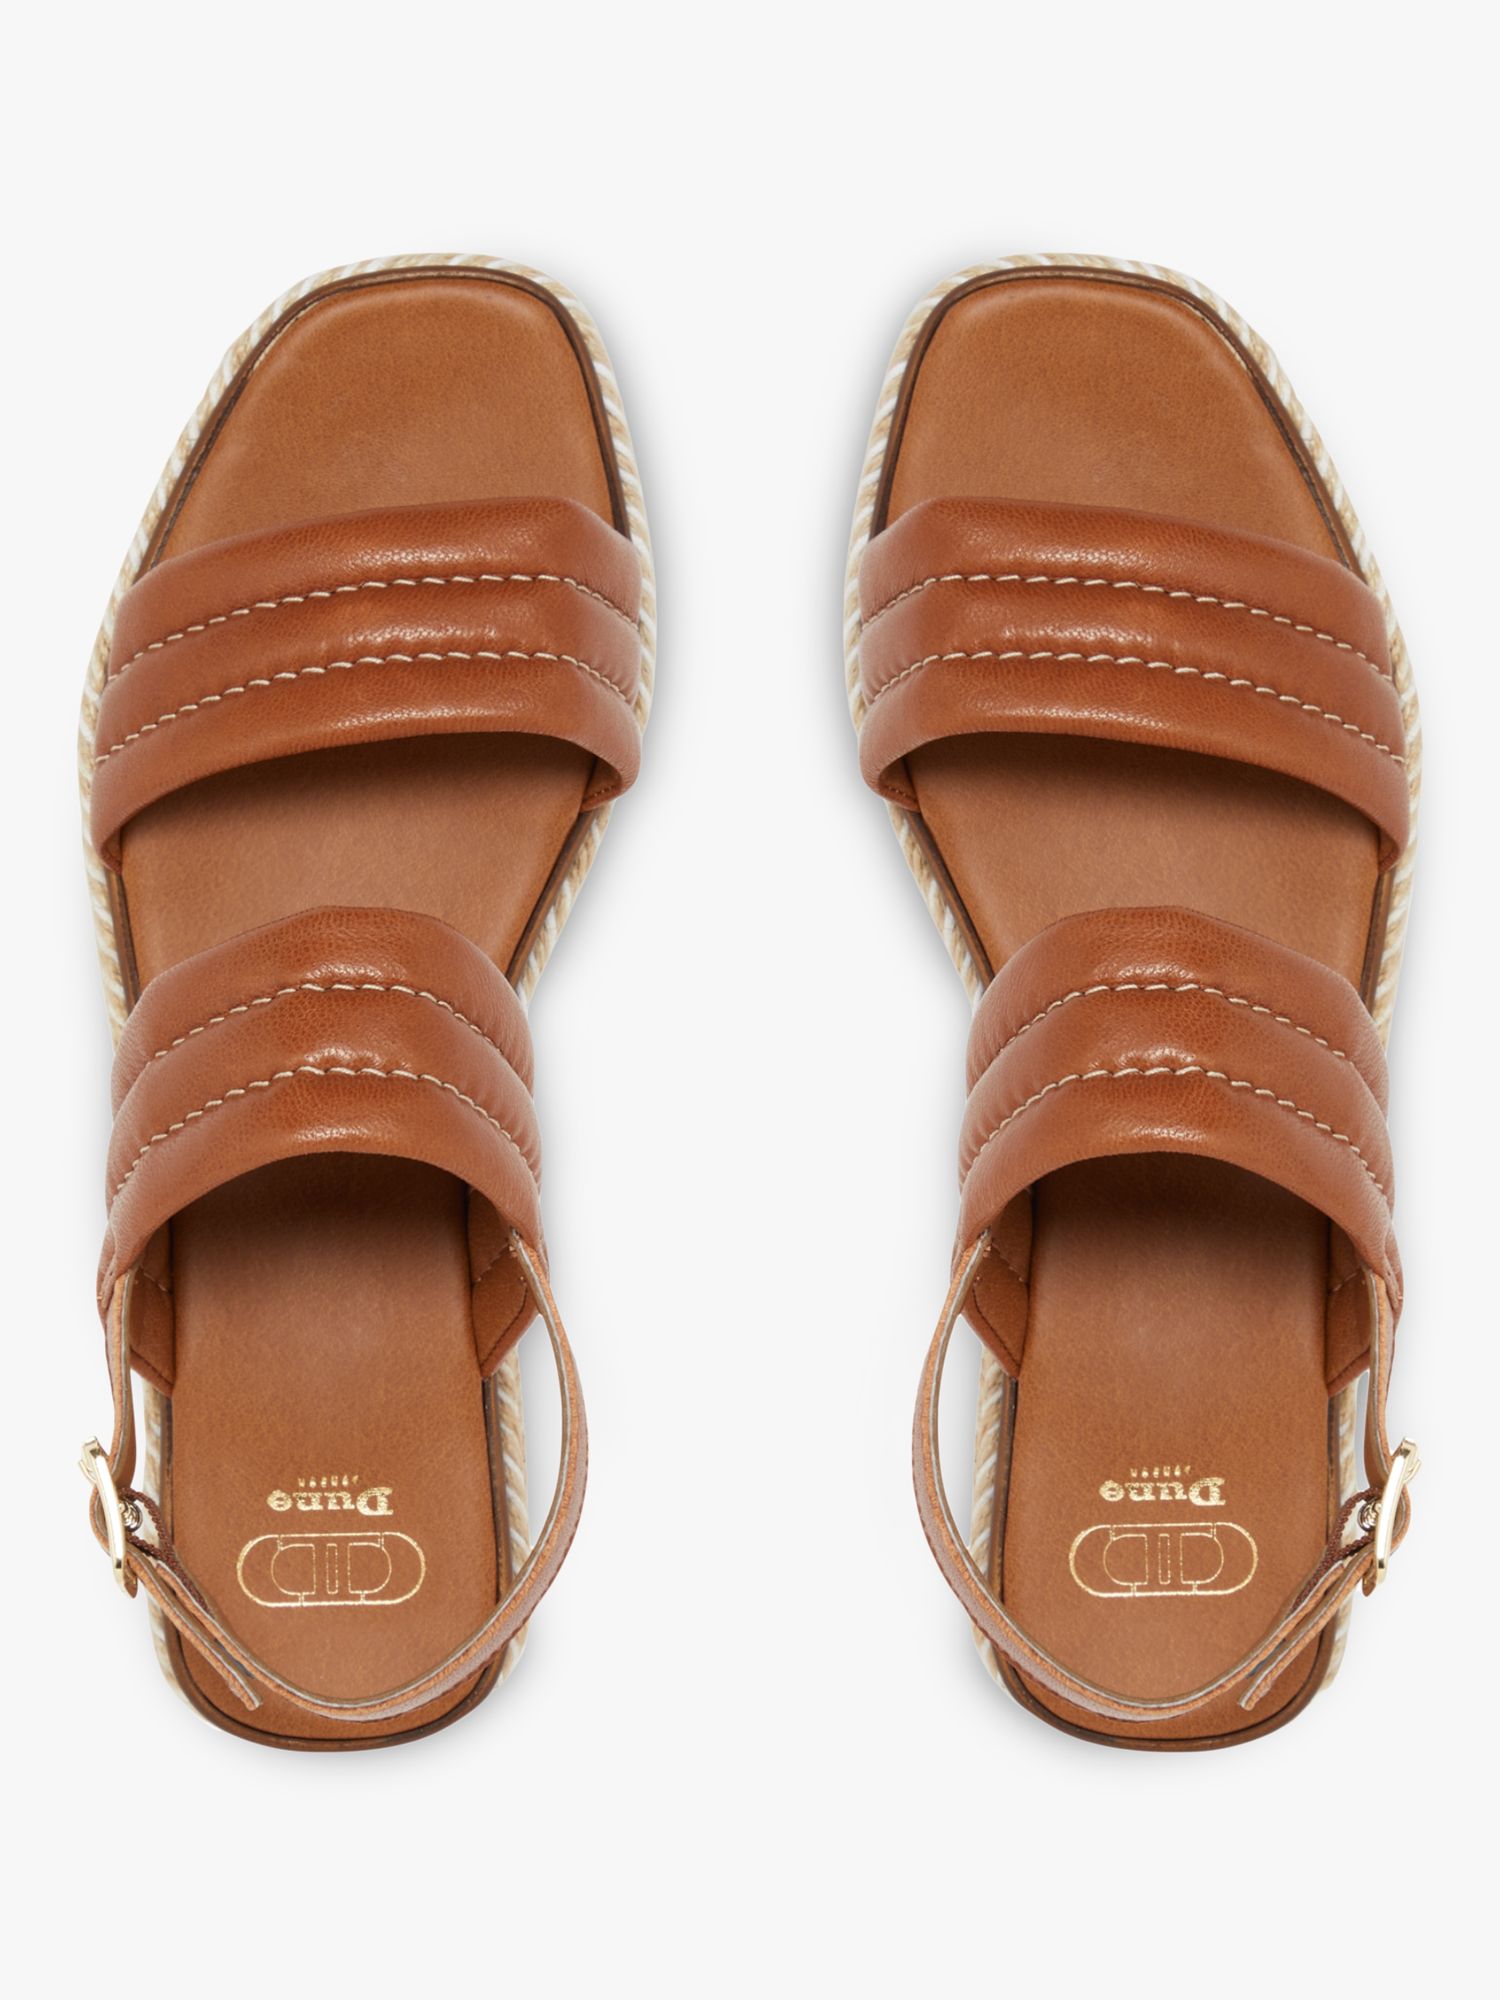 Dune Kazzy Leather Padded Wedge Sandals, Tan at John Lewis & Partners